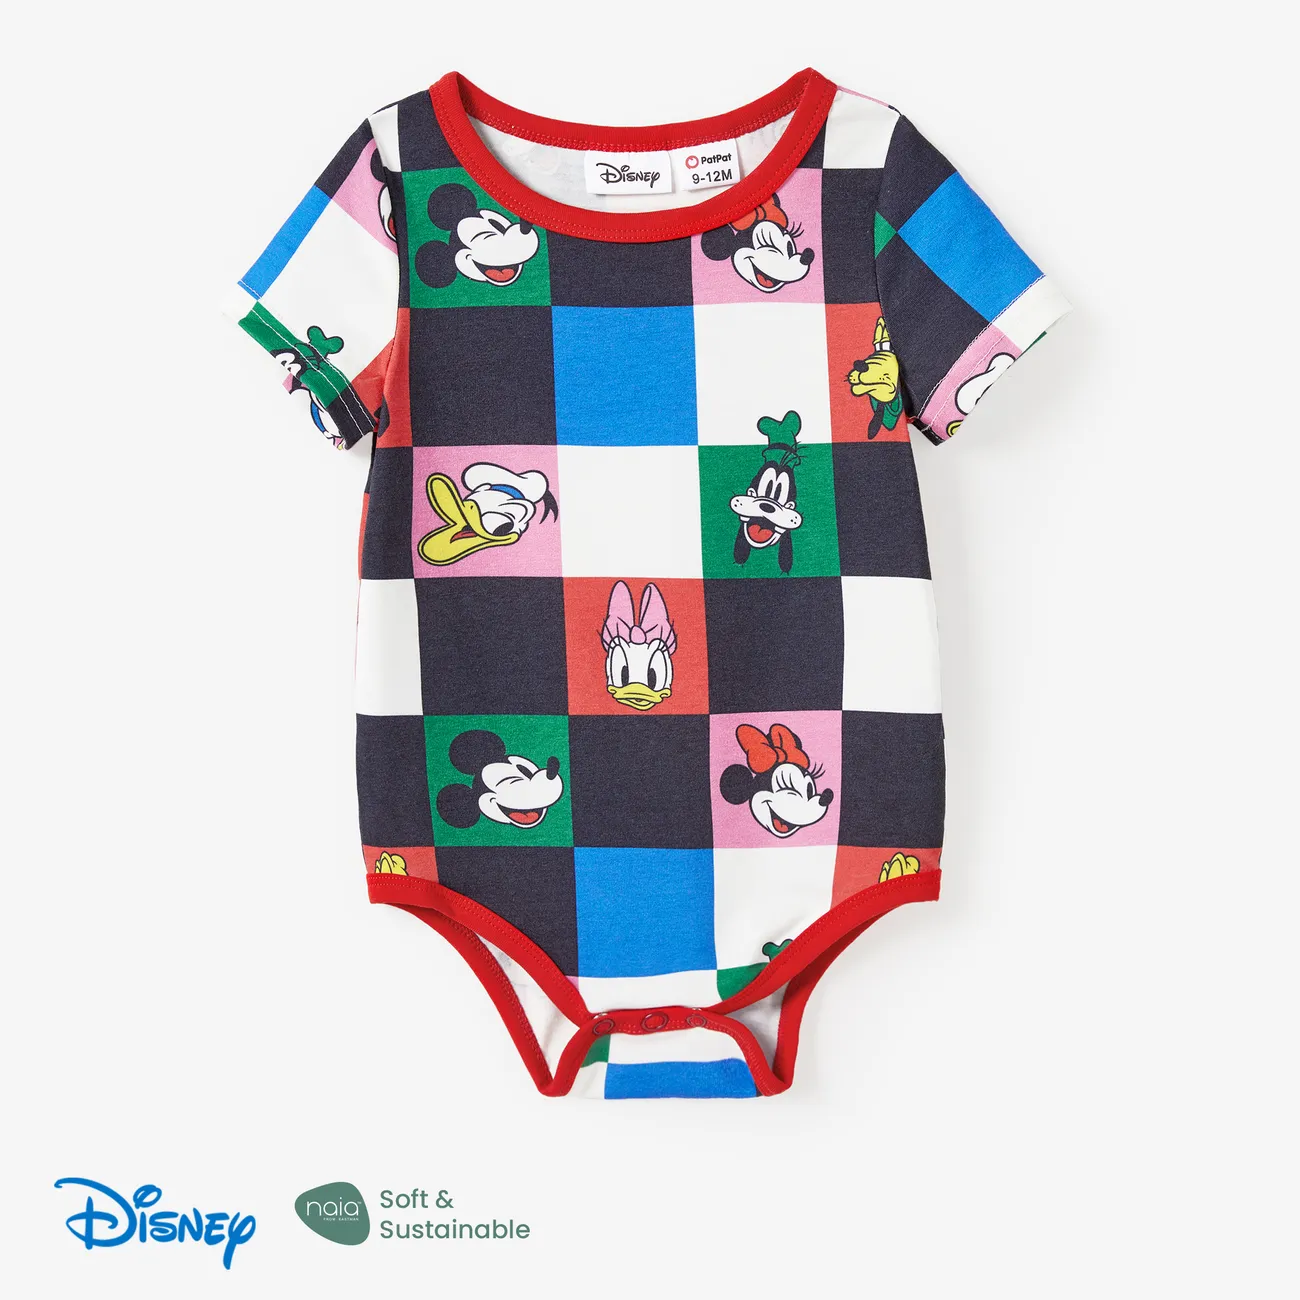 Disney Mickey and Friends Familien-Looks Ärmellos Familien-Outfits Sets Mehrfarbig big image 1